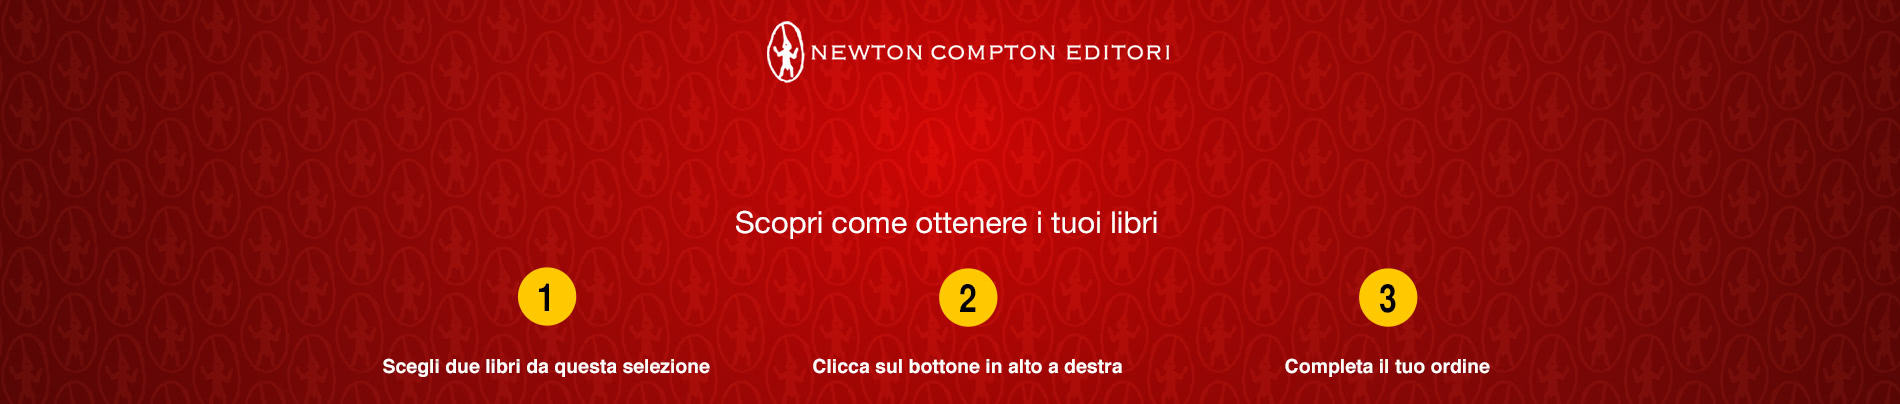 speciali bannerpag newton1 1